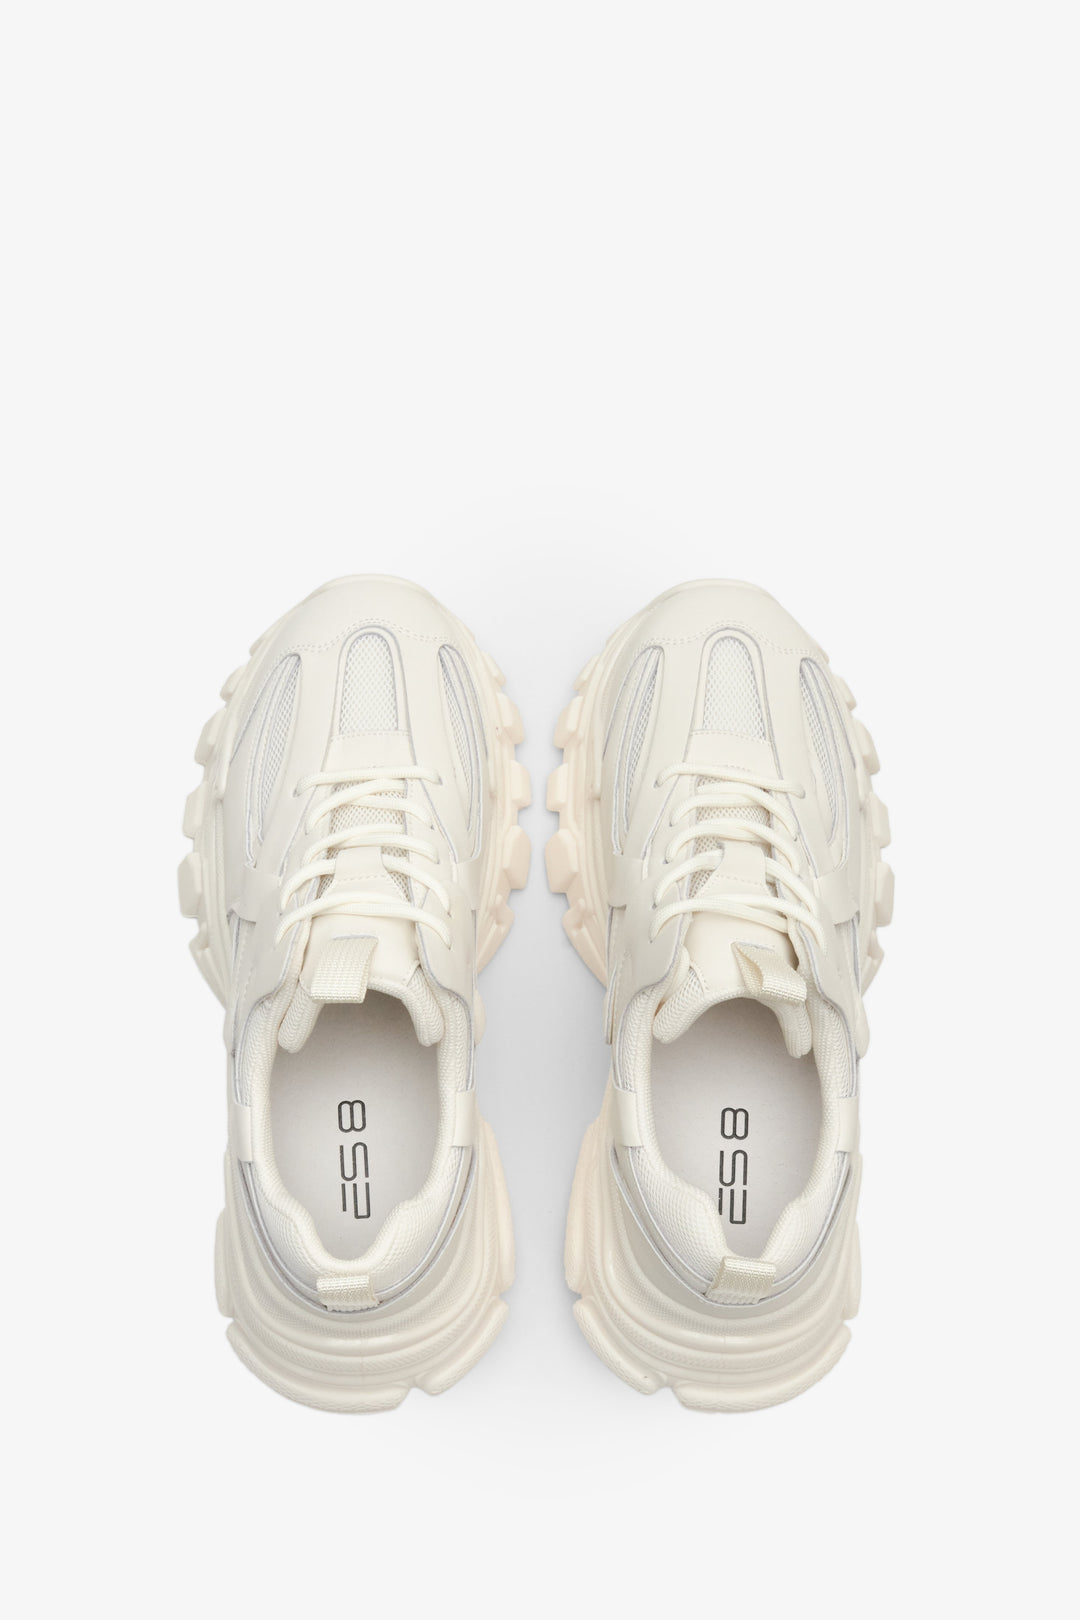 Women's white ES 8 sneakers with laces for spring and autumn - top view presentation of the footwear.